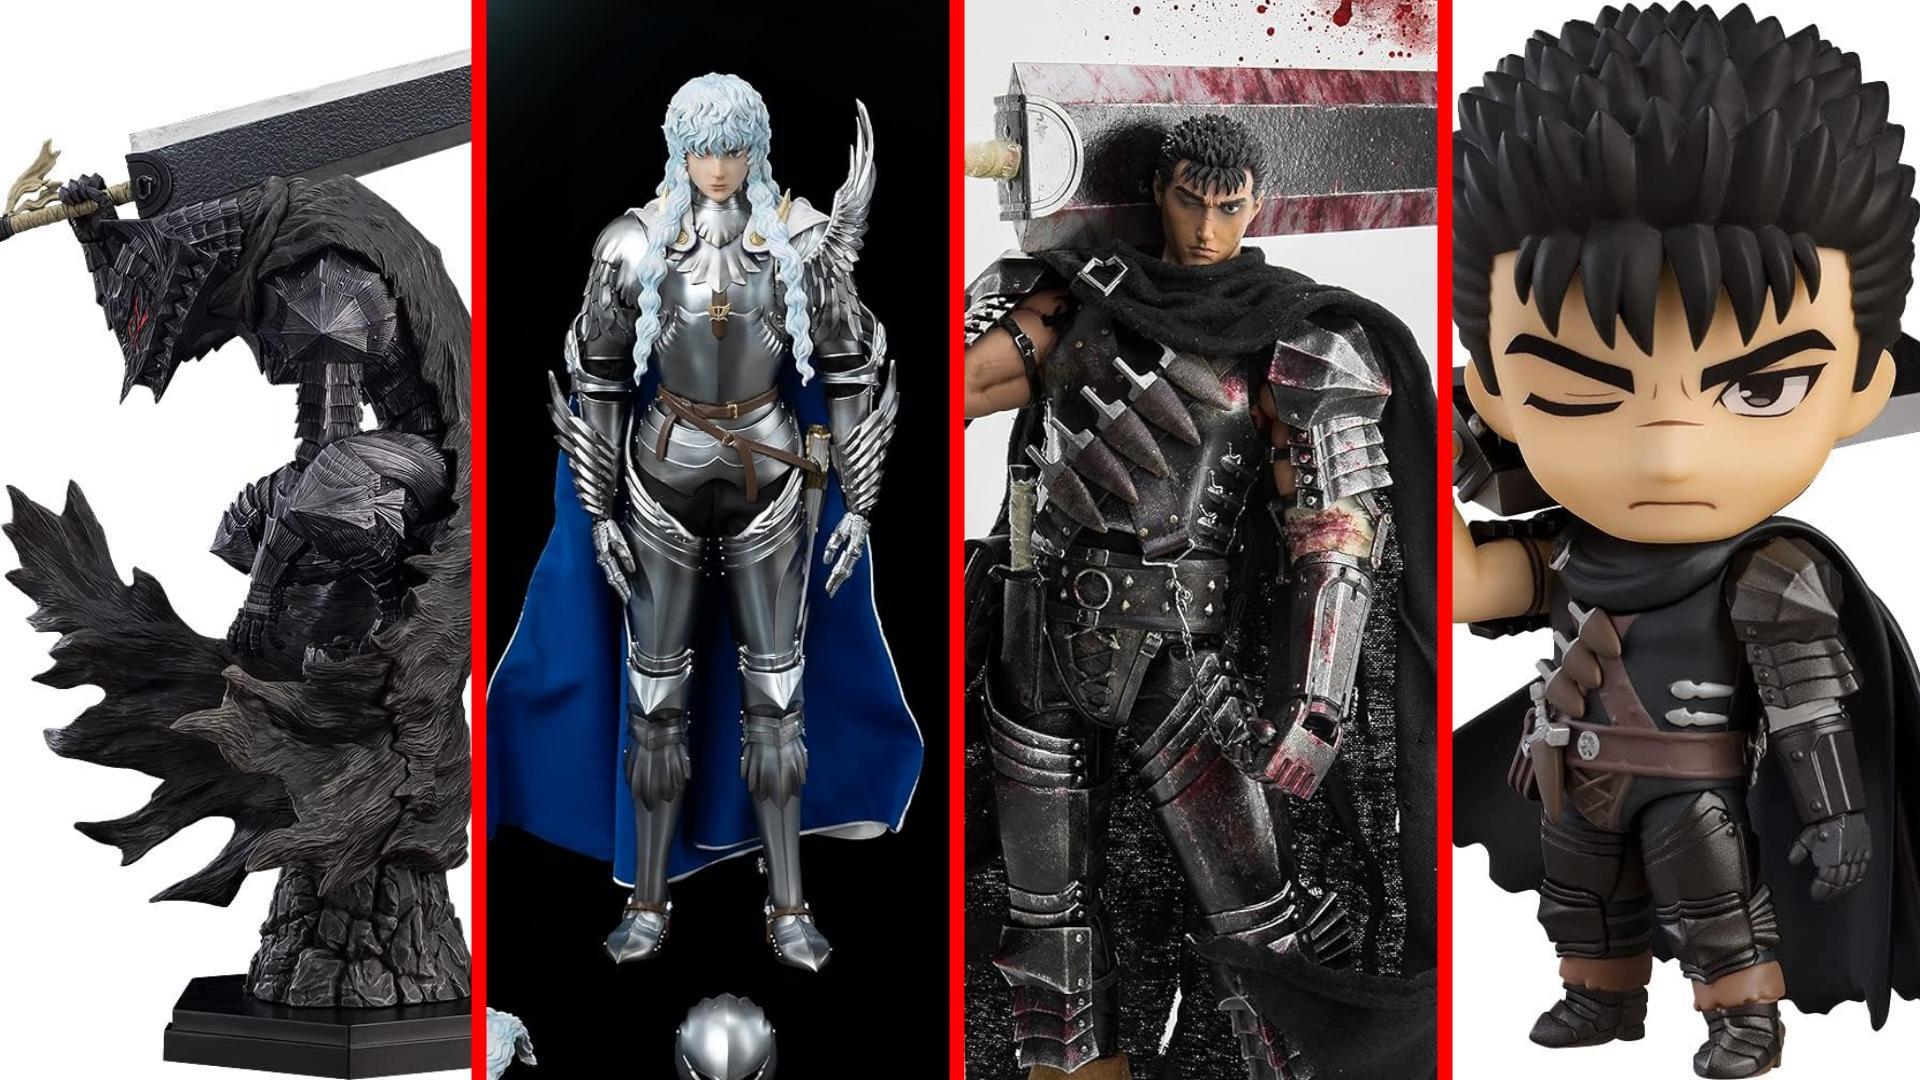 Several Berserk Collectible Figures Are Up For Preorder At Amazon